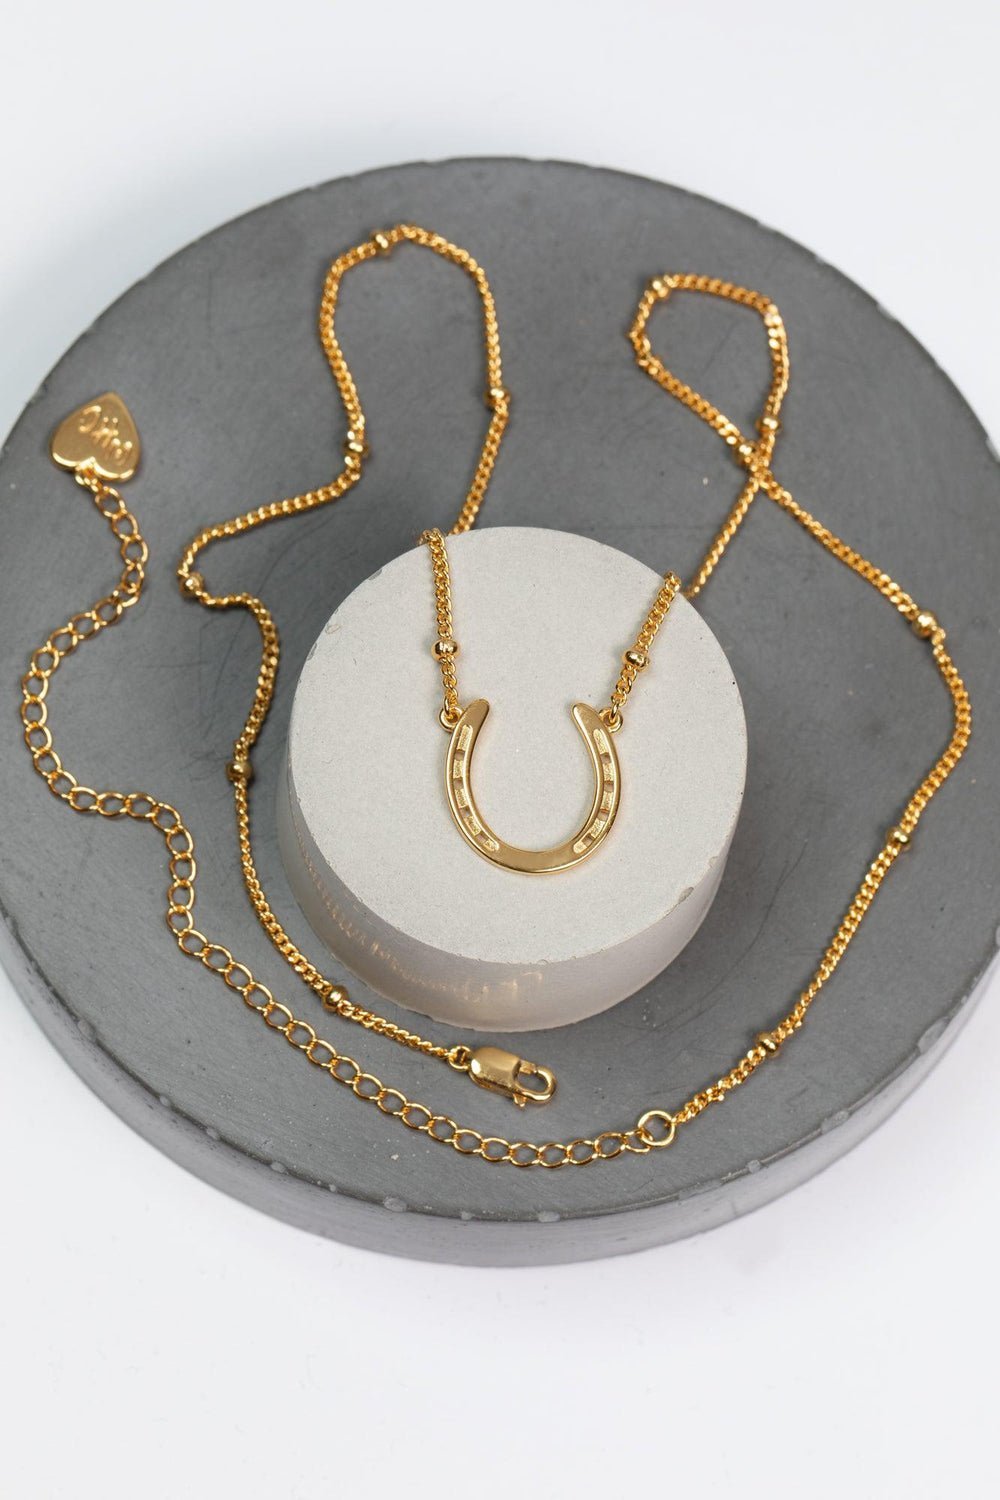 The Horse Shoe Necklace in Gold and Silver - The Wild Horse Club